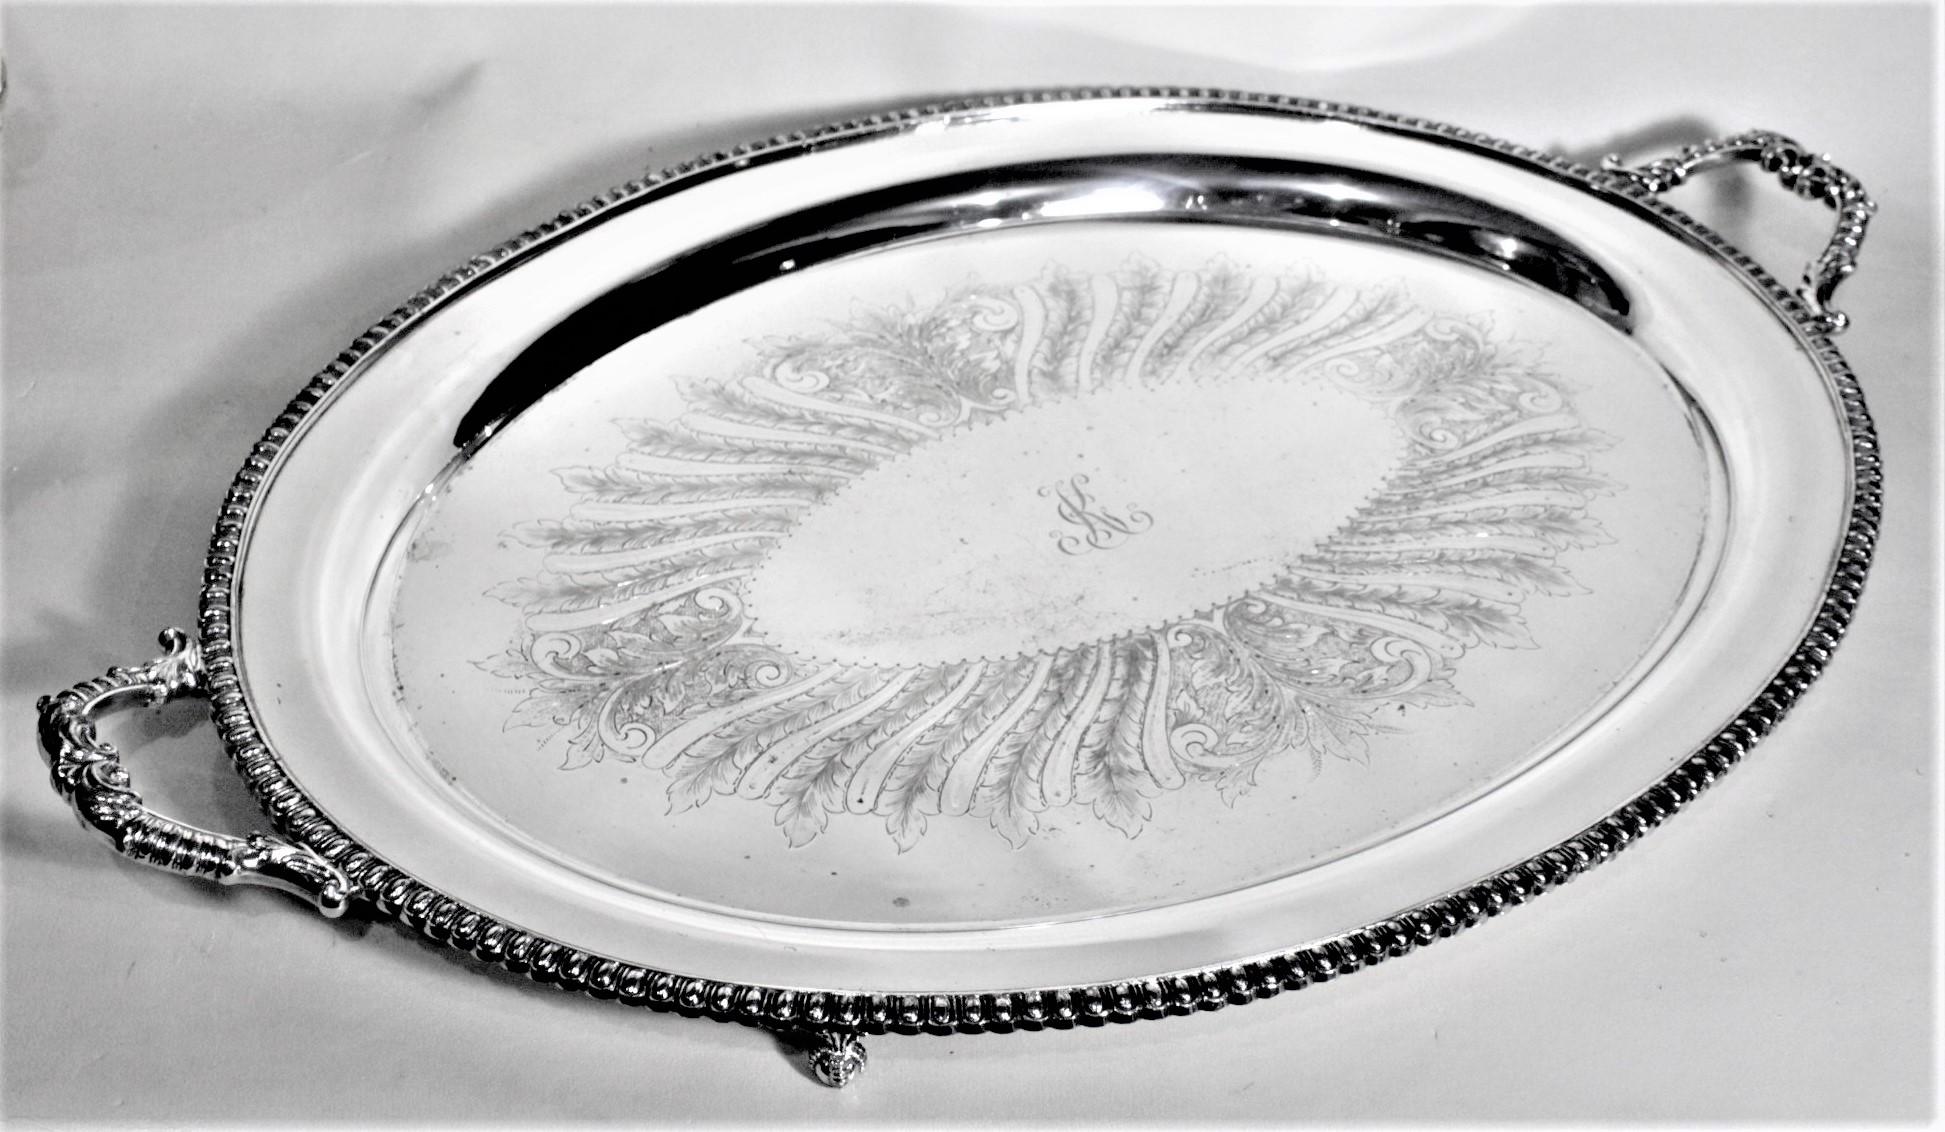 Large Antique Styled English Silver Plated Serving Tray In Good Condition For Sale In Hamilton, Ontario